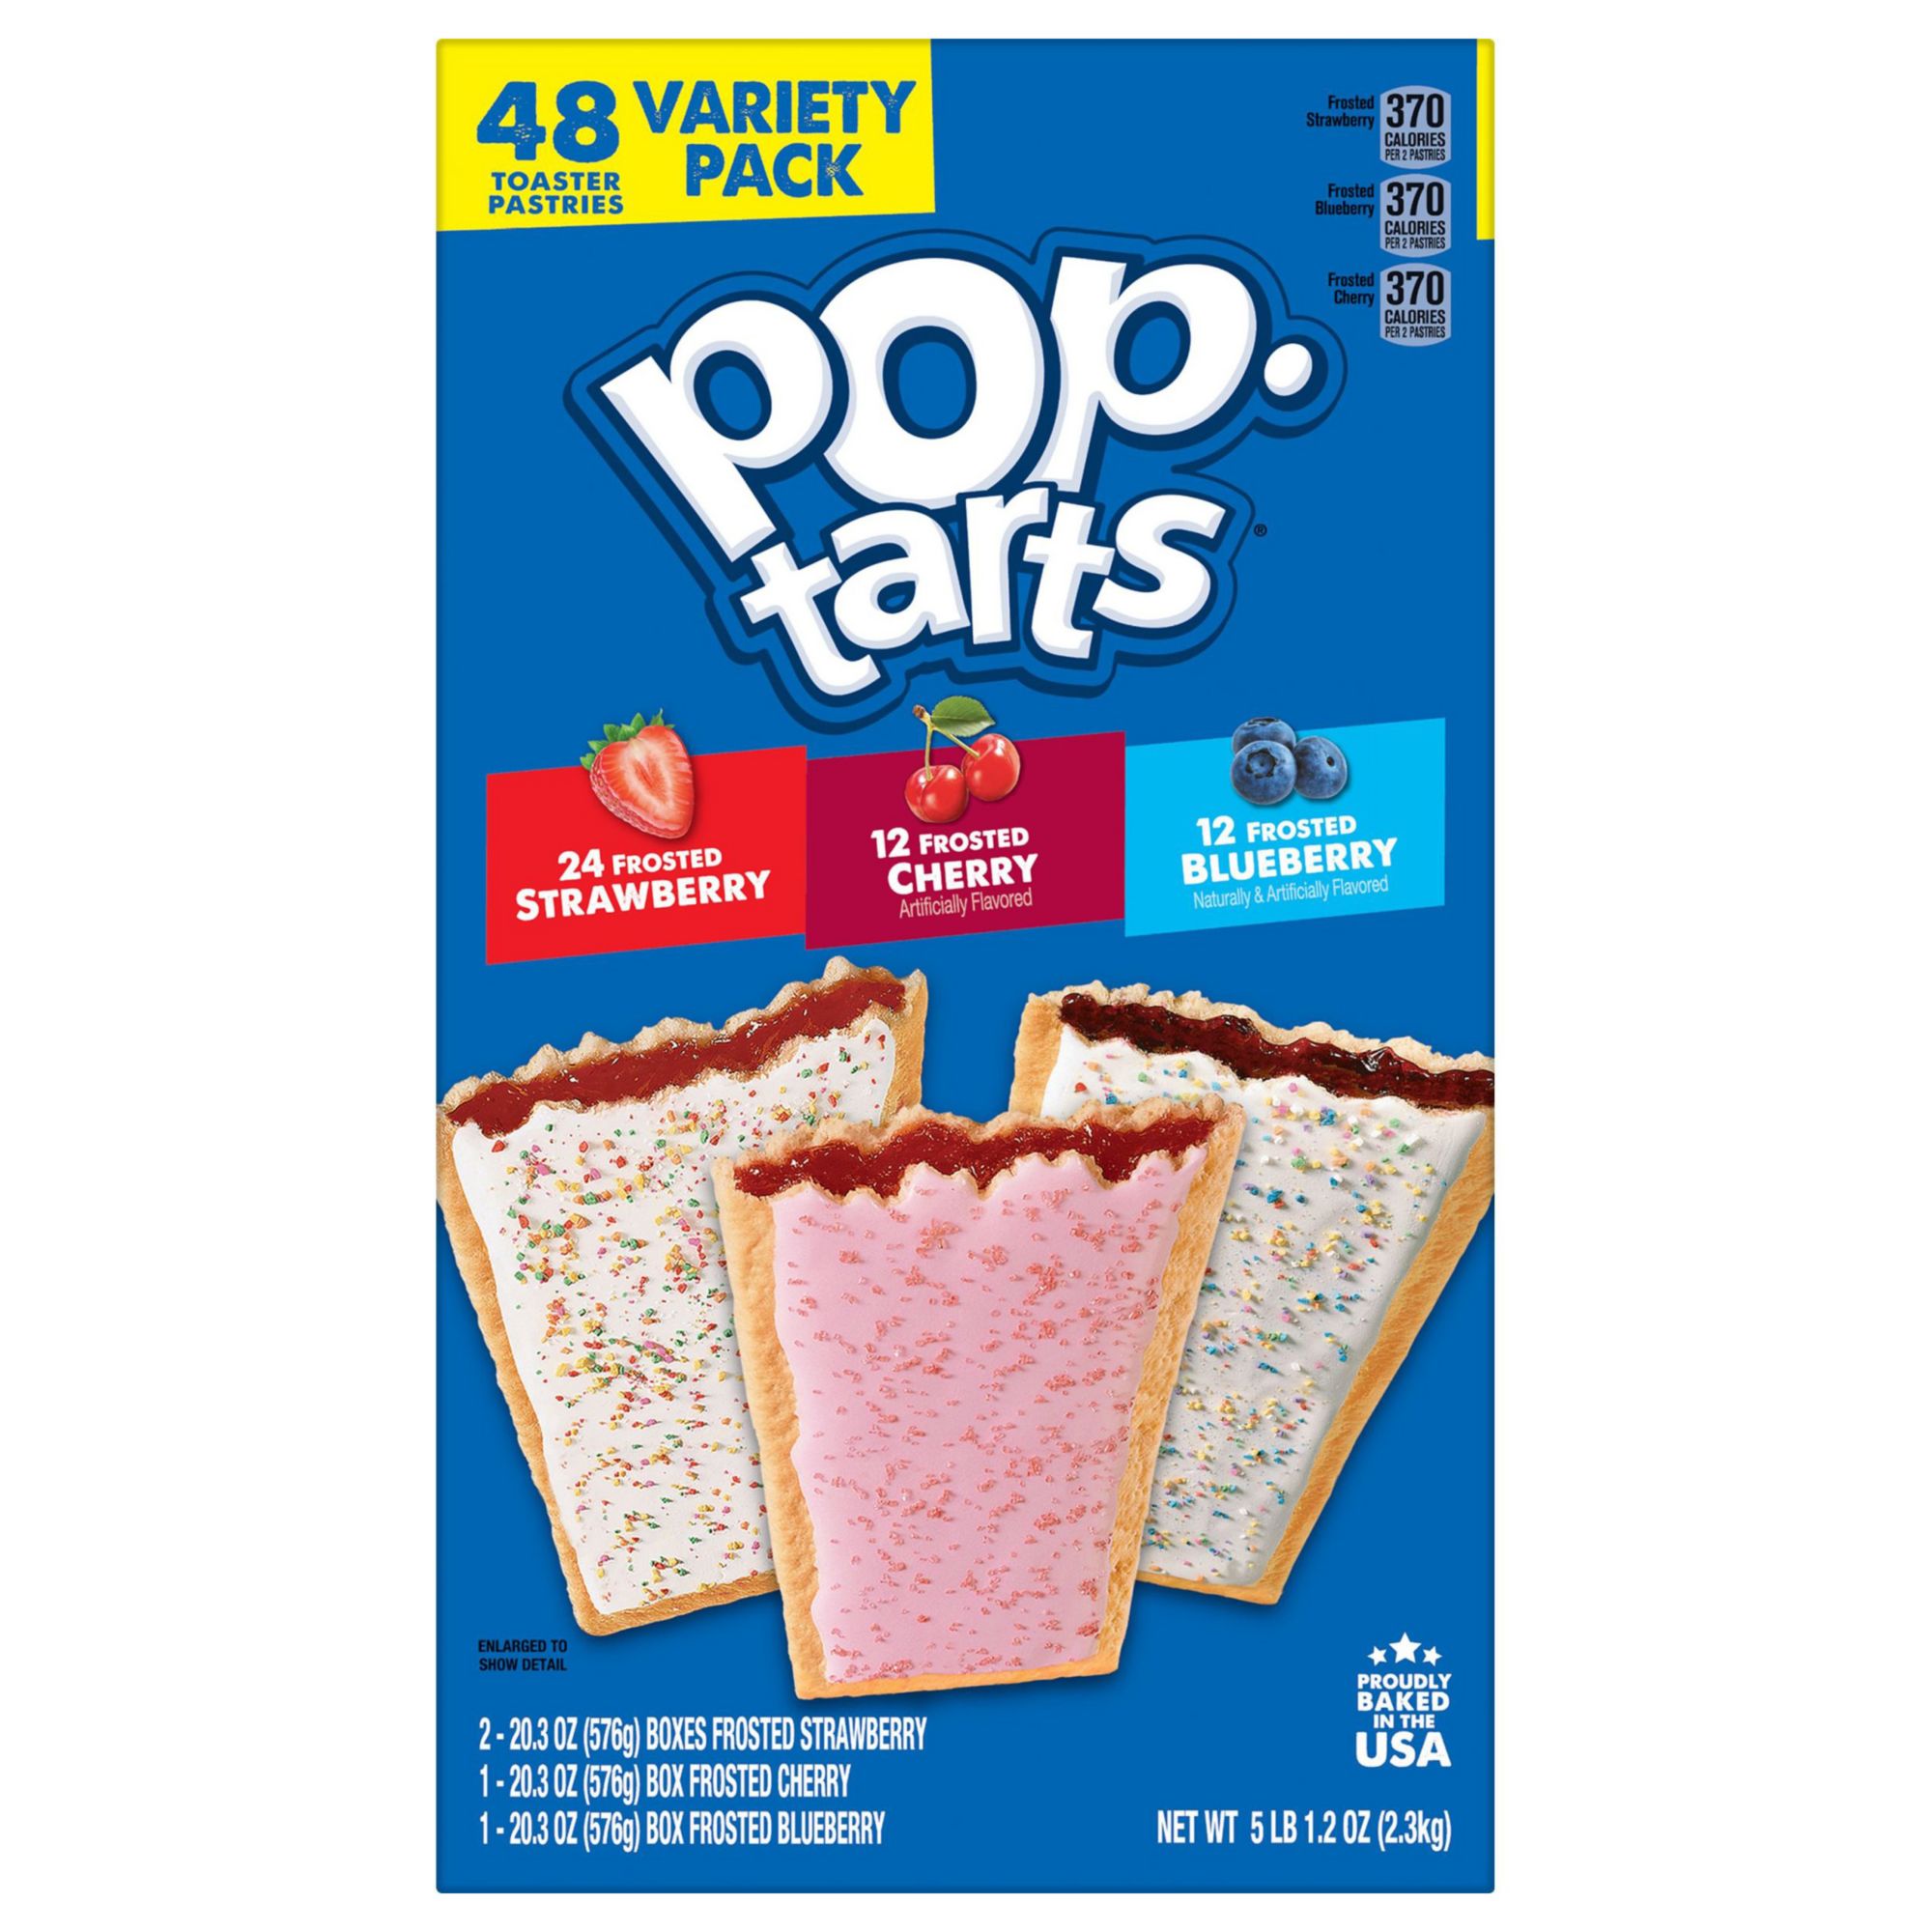 Pop-Tarts Frosted Sugar Cookie Instant Breakfast Toaster Pastries,  Shelf-Stable, Ready-to-Eat, 27 oz, 16 Count Box